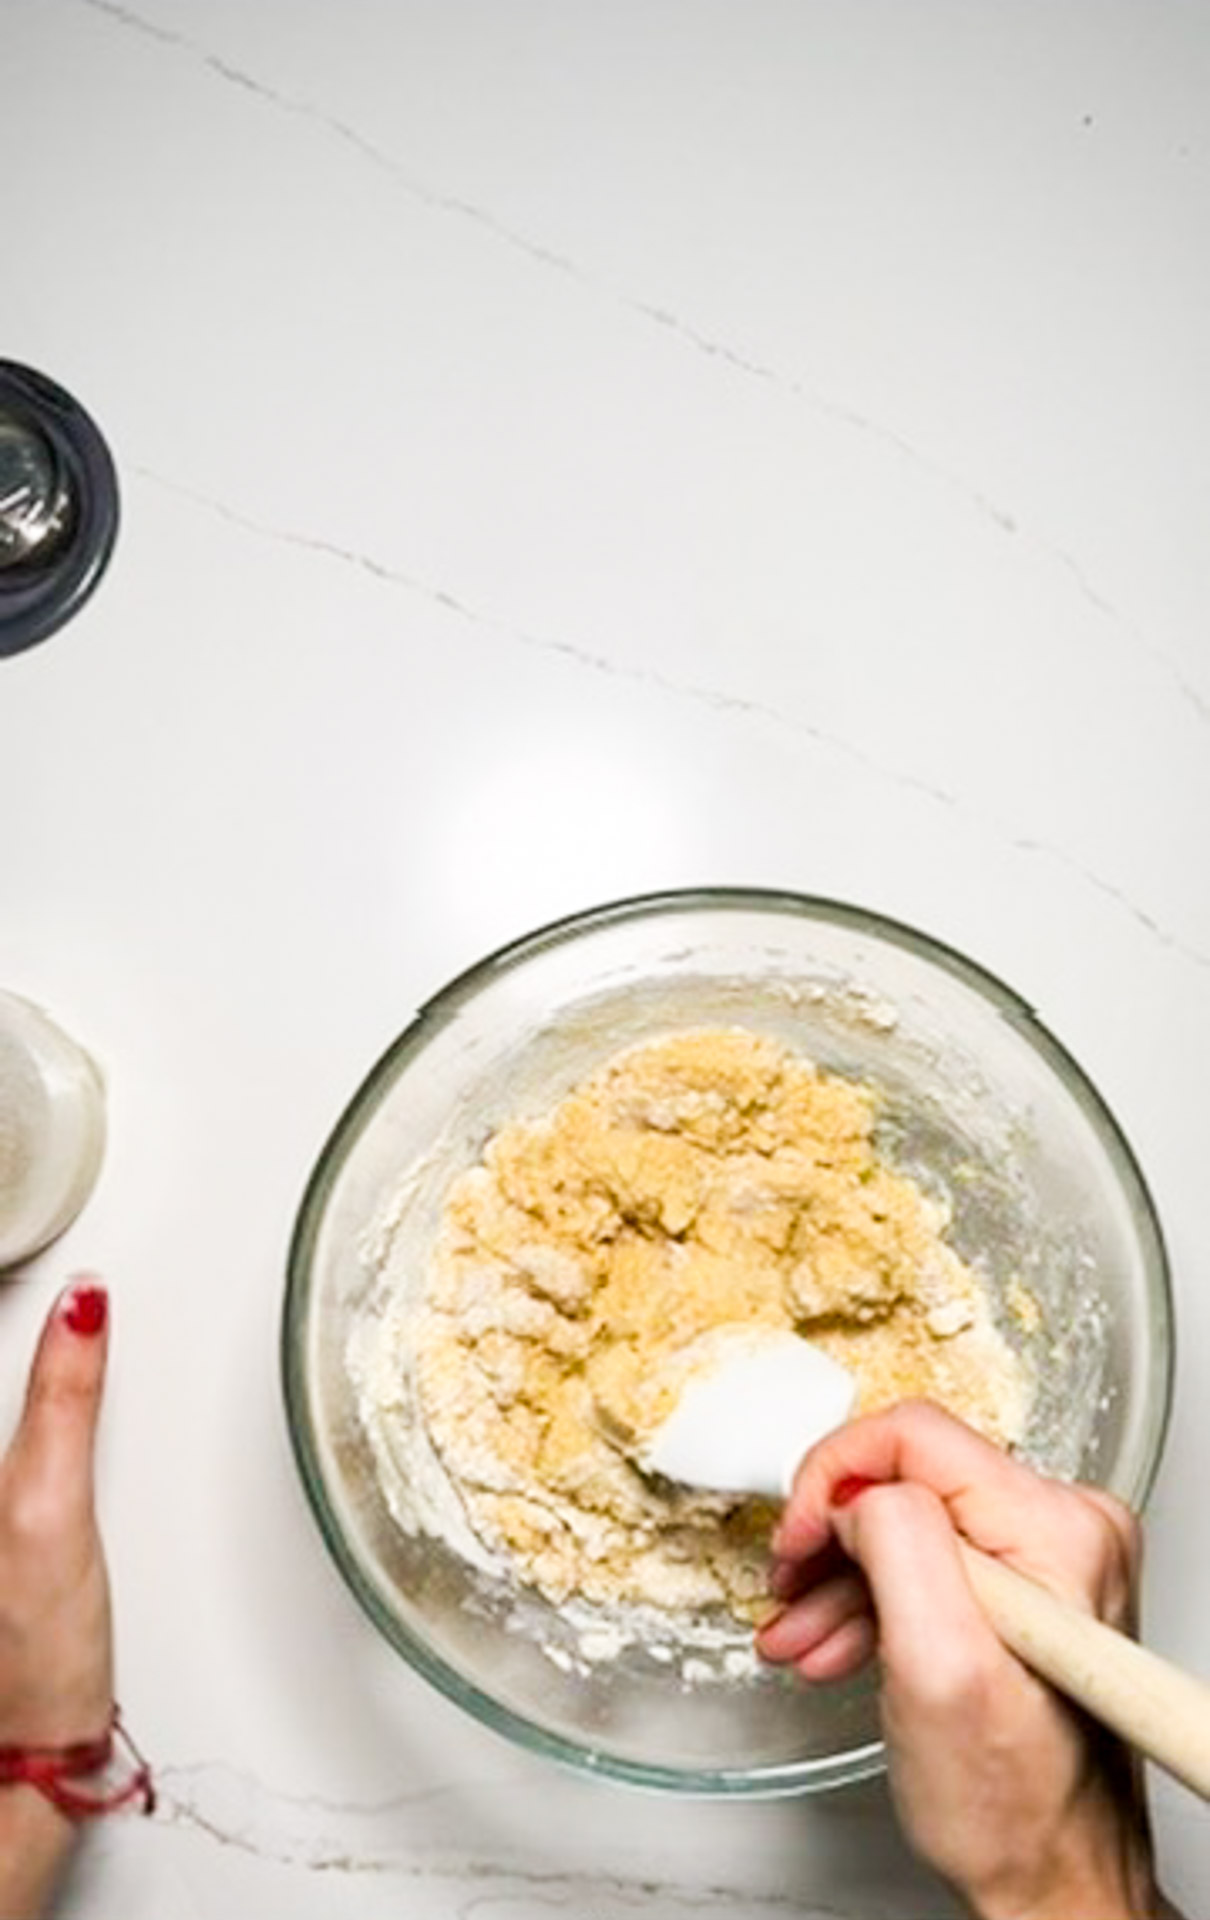 A person mixing ingredients in a glass bowl to create a vegan cornbread recipe.